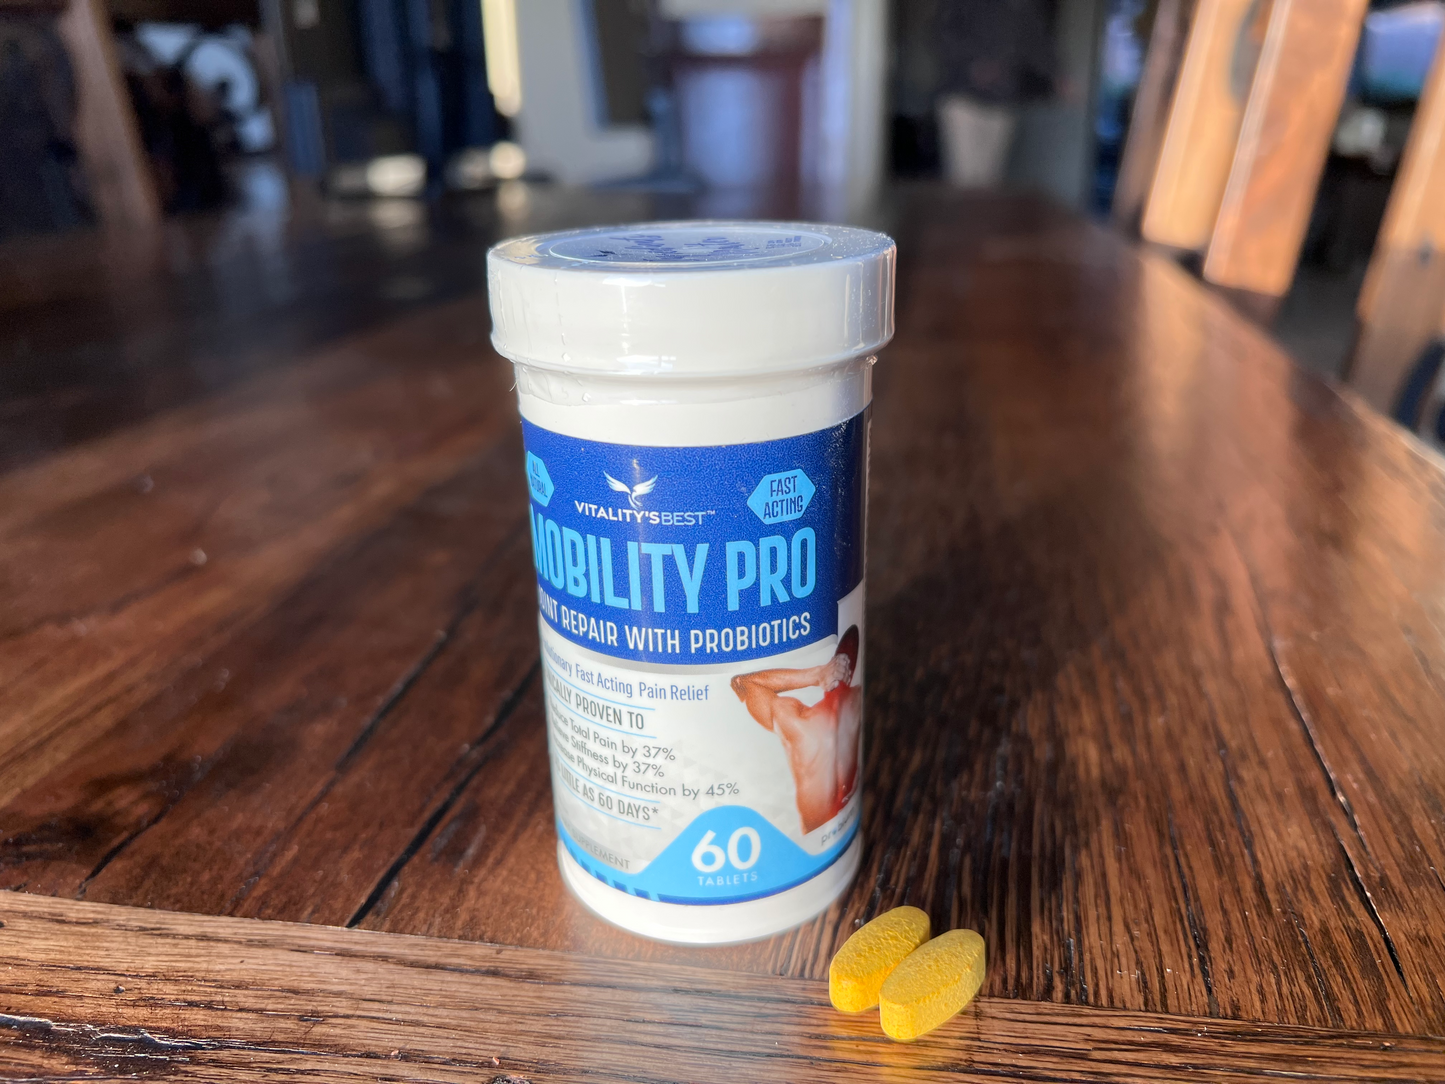 Mobility Pro - Joint Repair, Daily Tablets with Probiotics